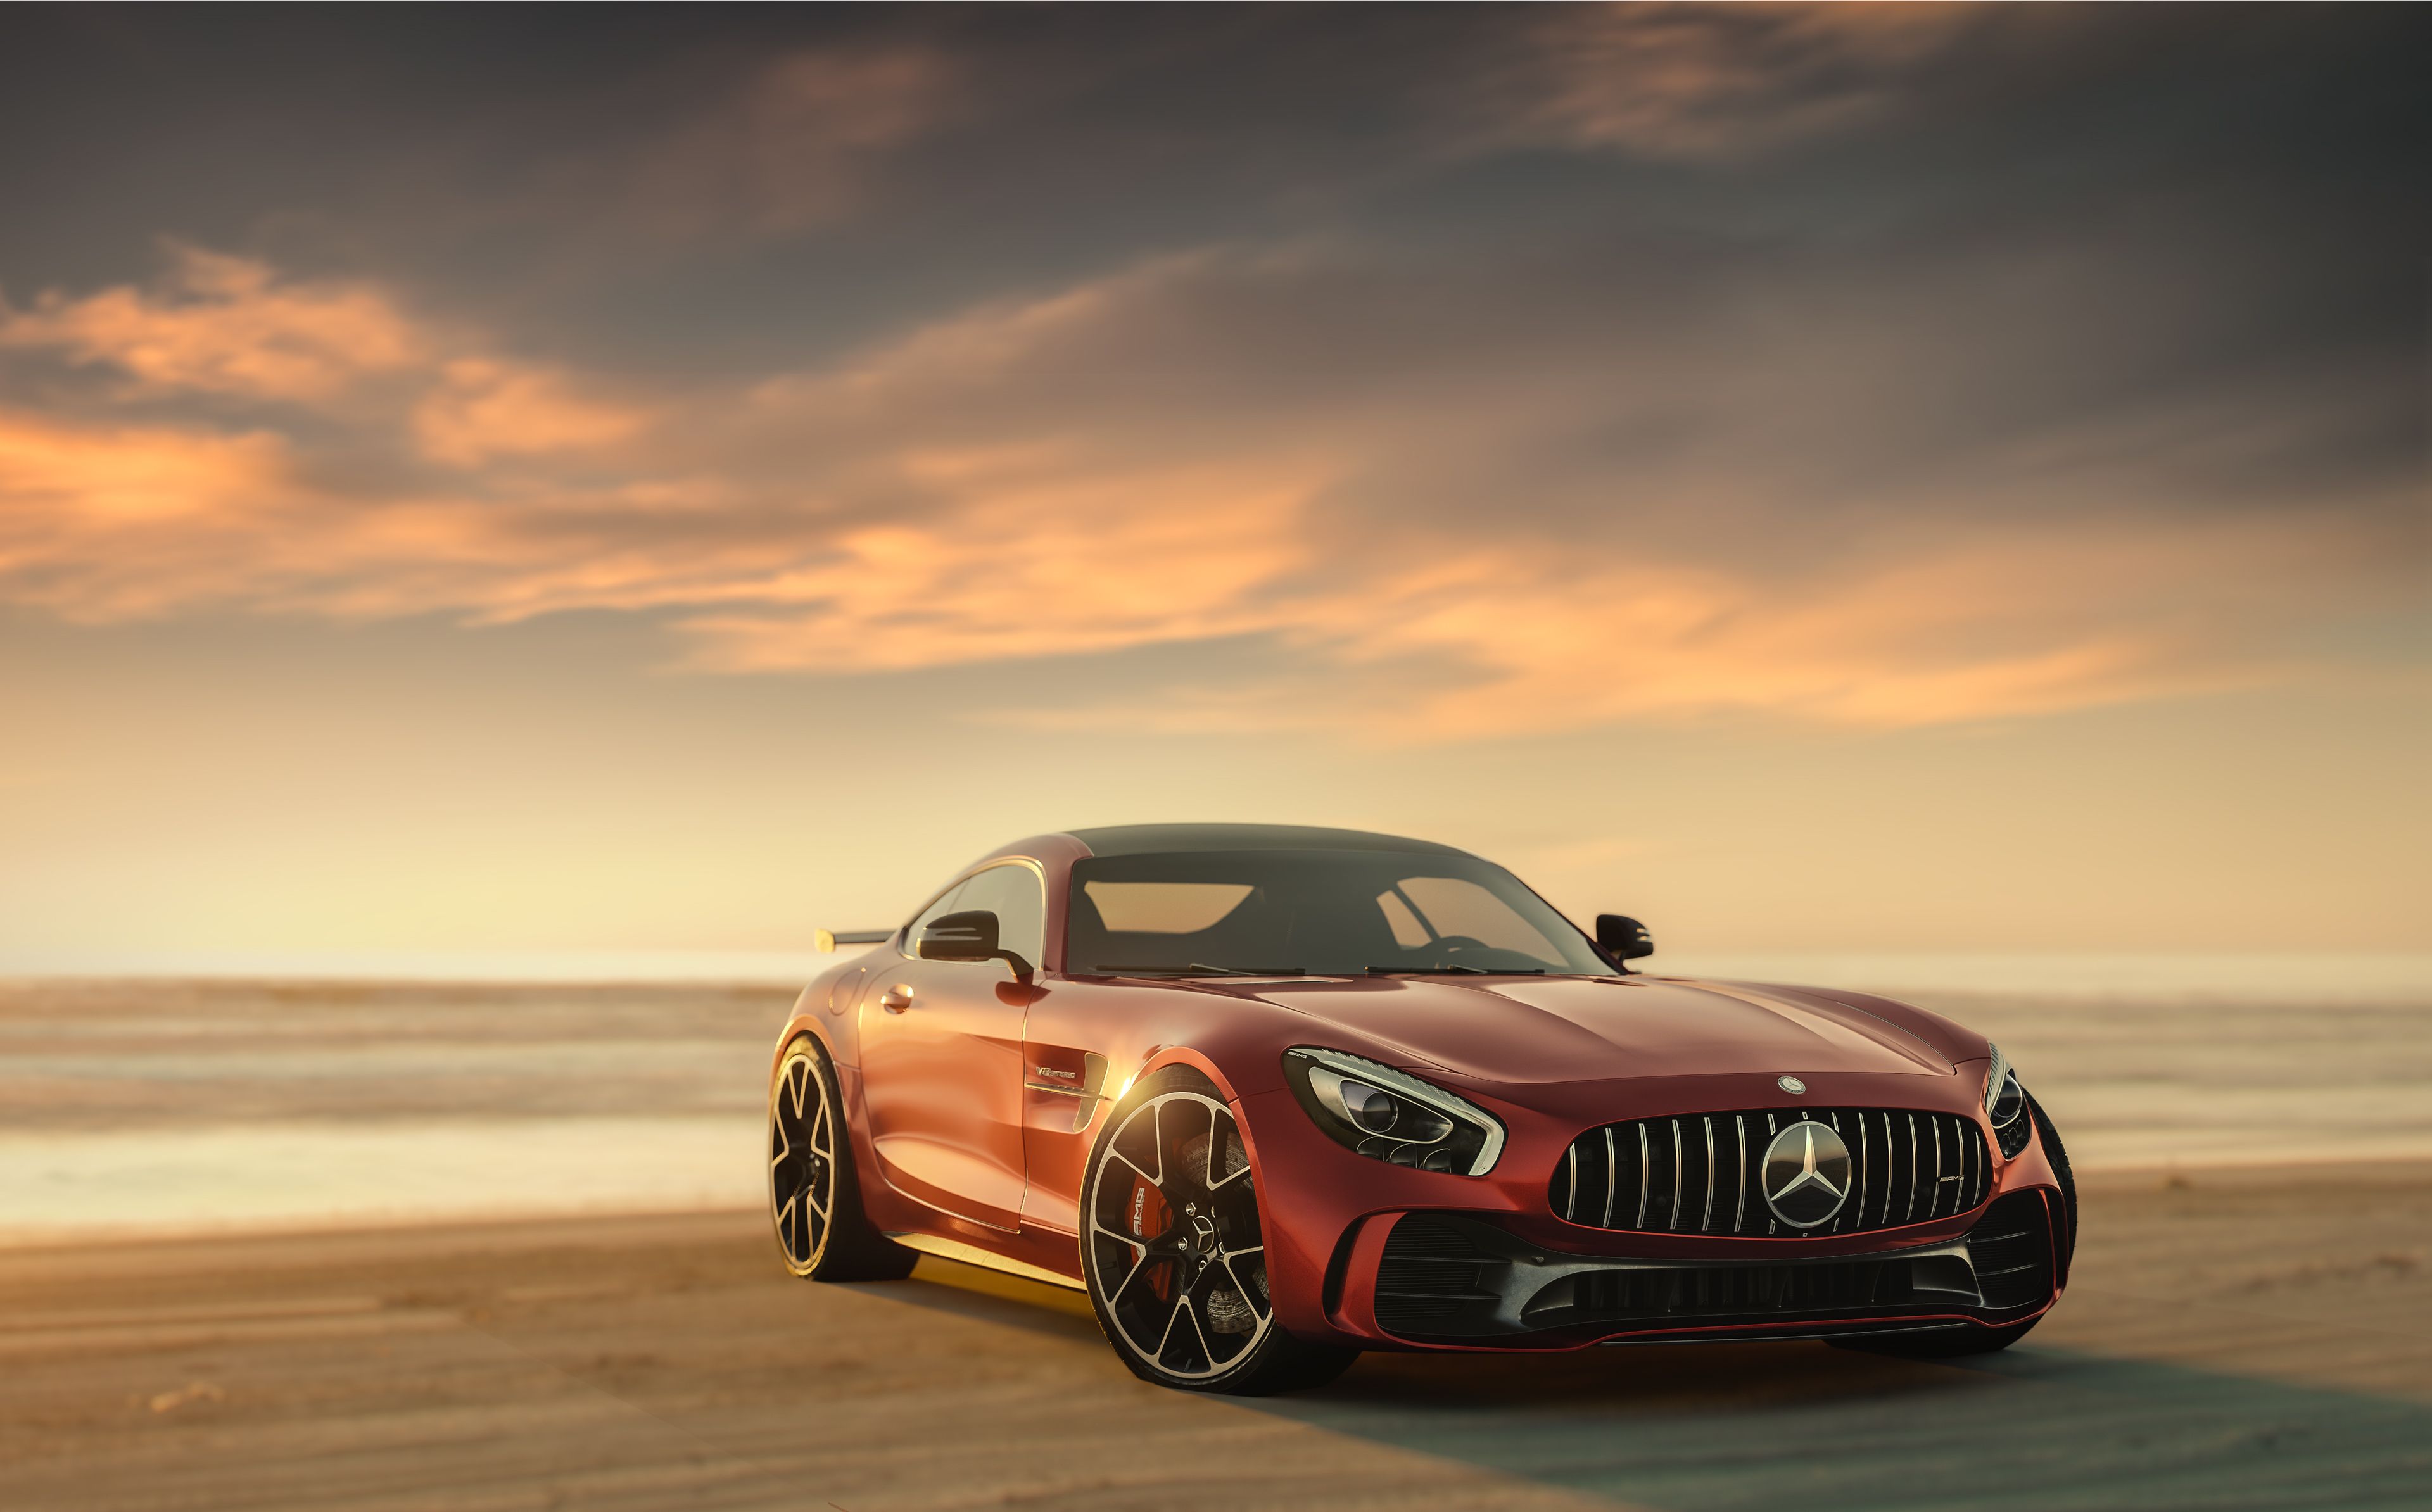 Mercedes Benz Amg Gt CGI 4K, HD Cars, 4k Wallpaper, Image, Background, Photo and Picture